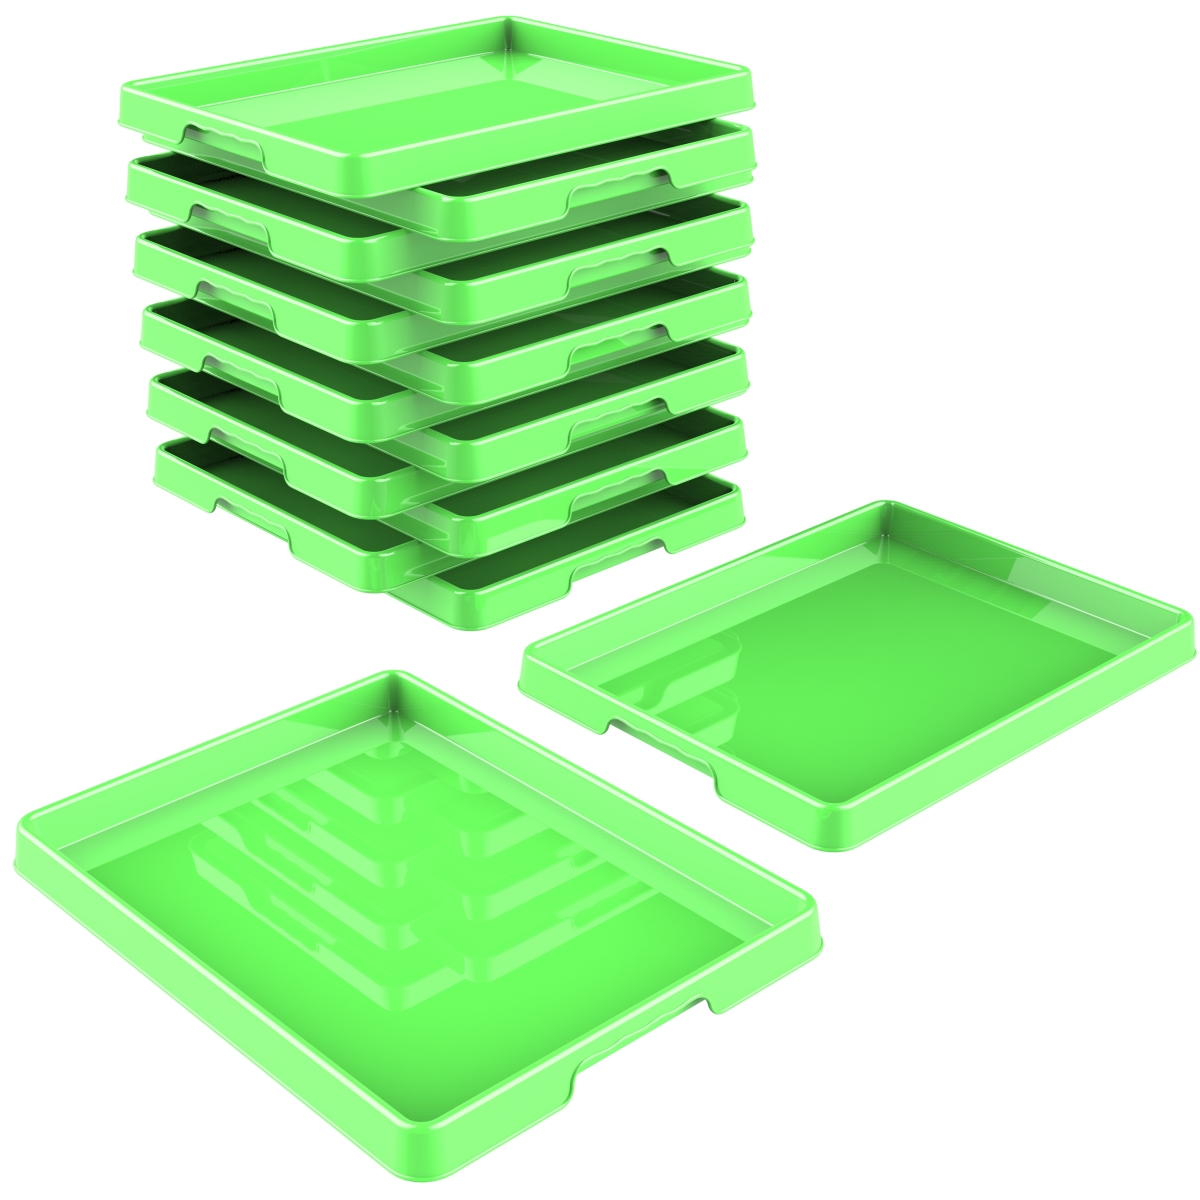 00444e12c 12 X 16 In. Sorting & Crafts Tray, Green - Pack Of 12